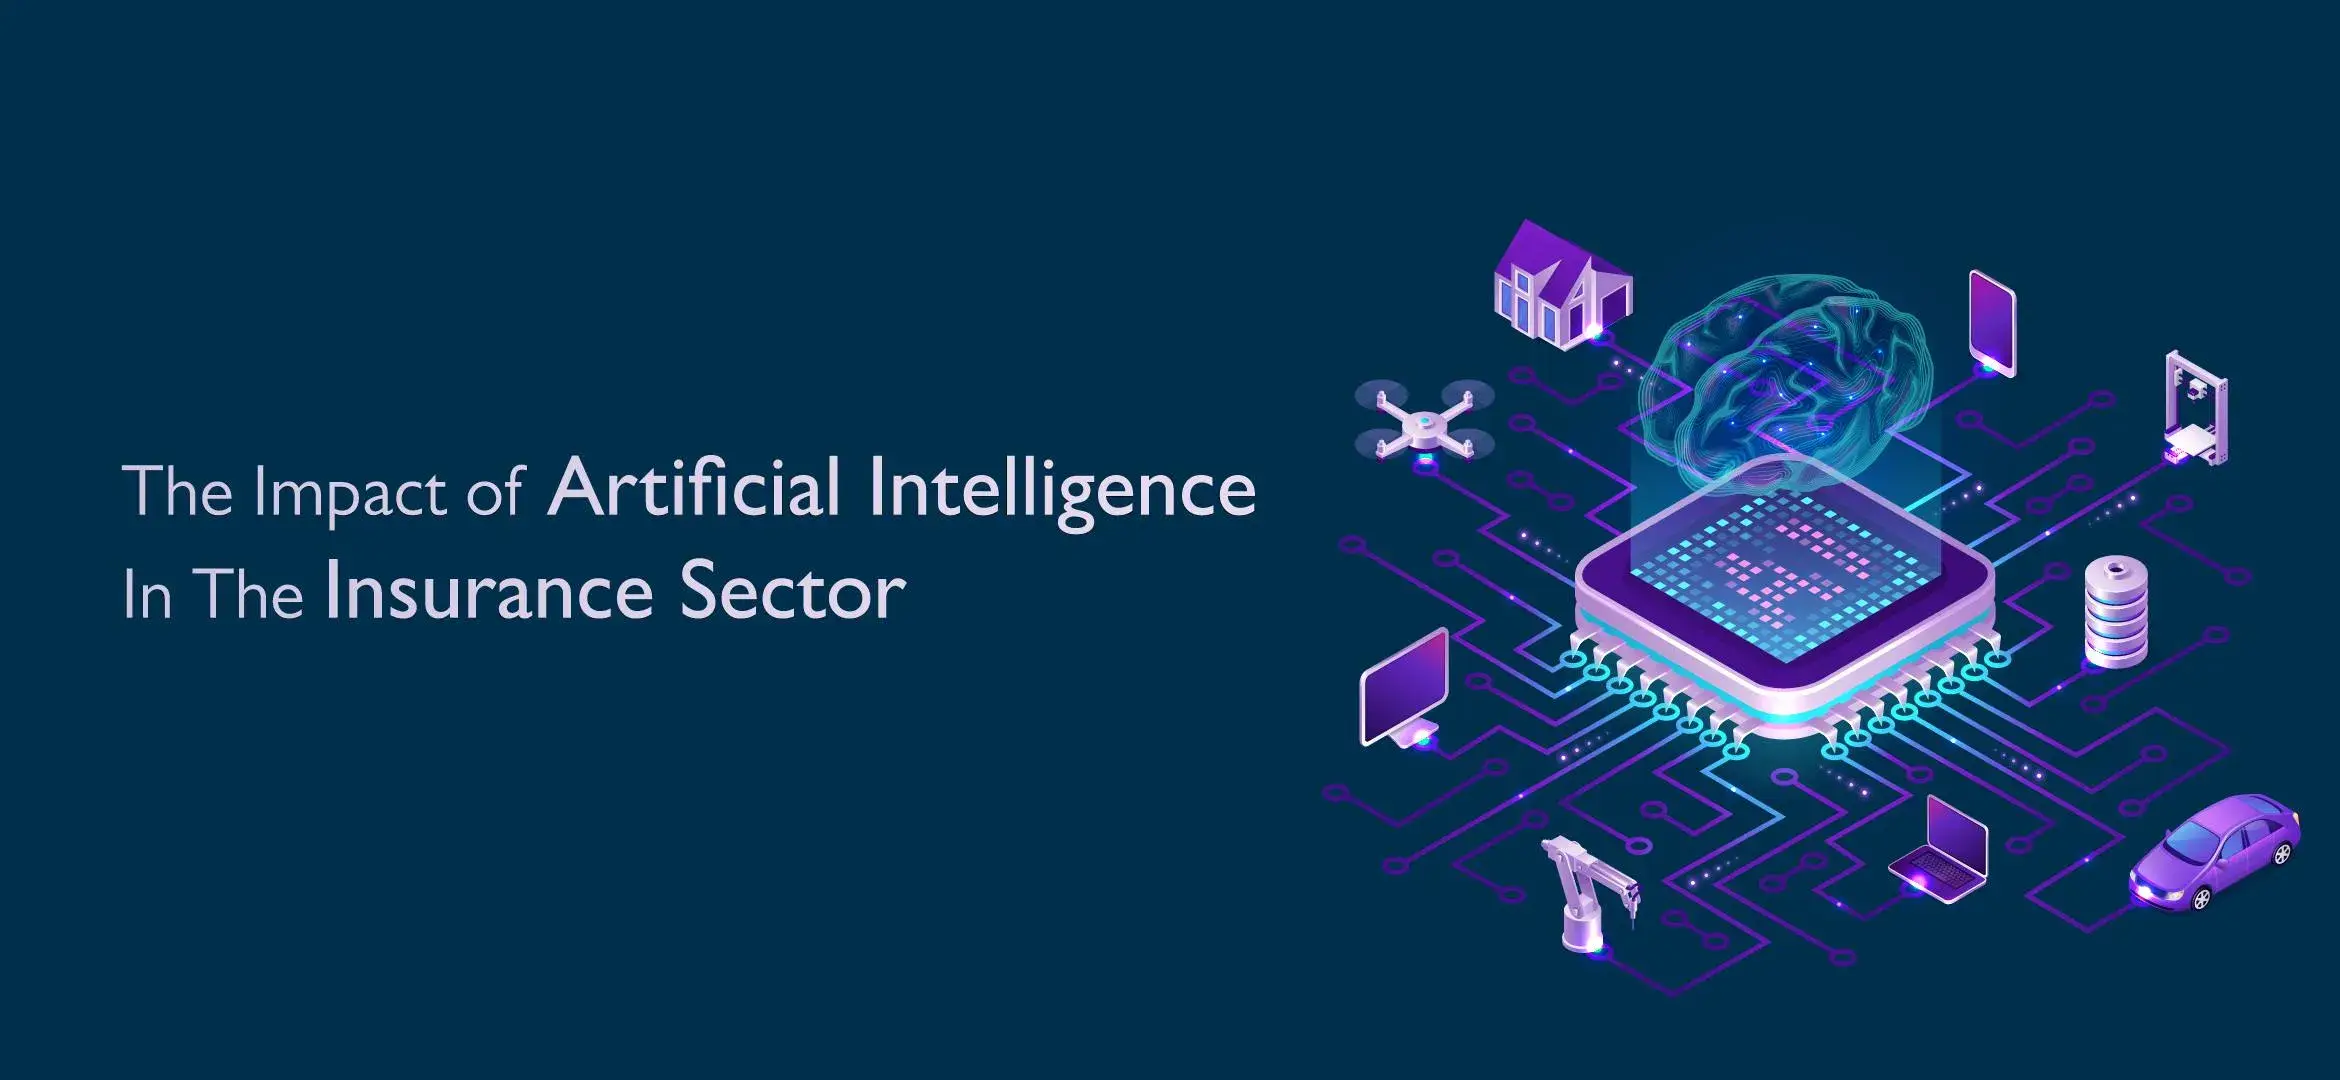 The Impact of Artificial Intelligence In The Insurance Sector